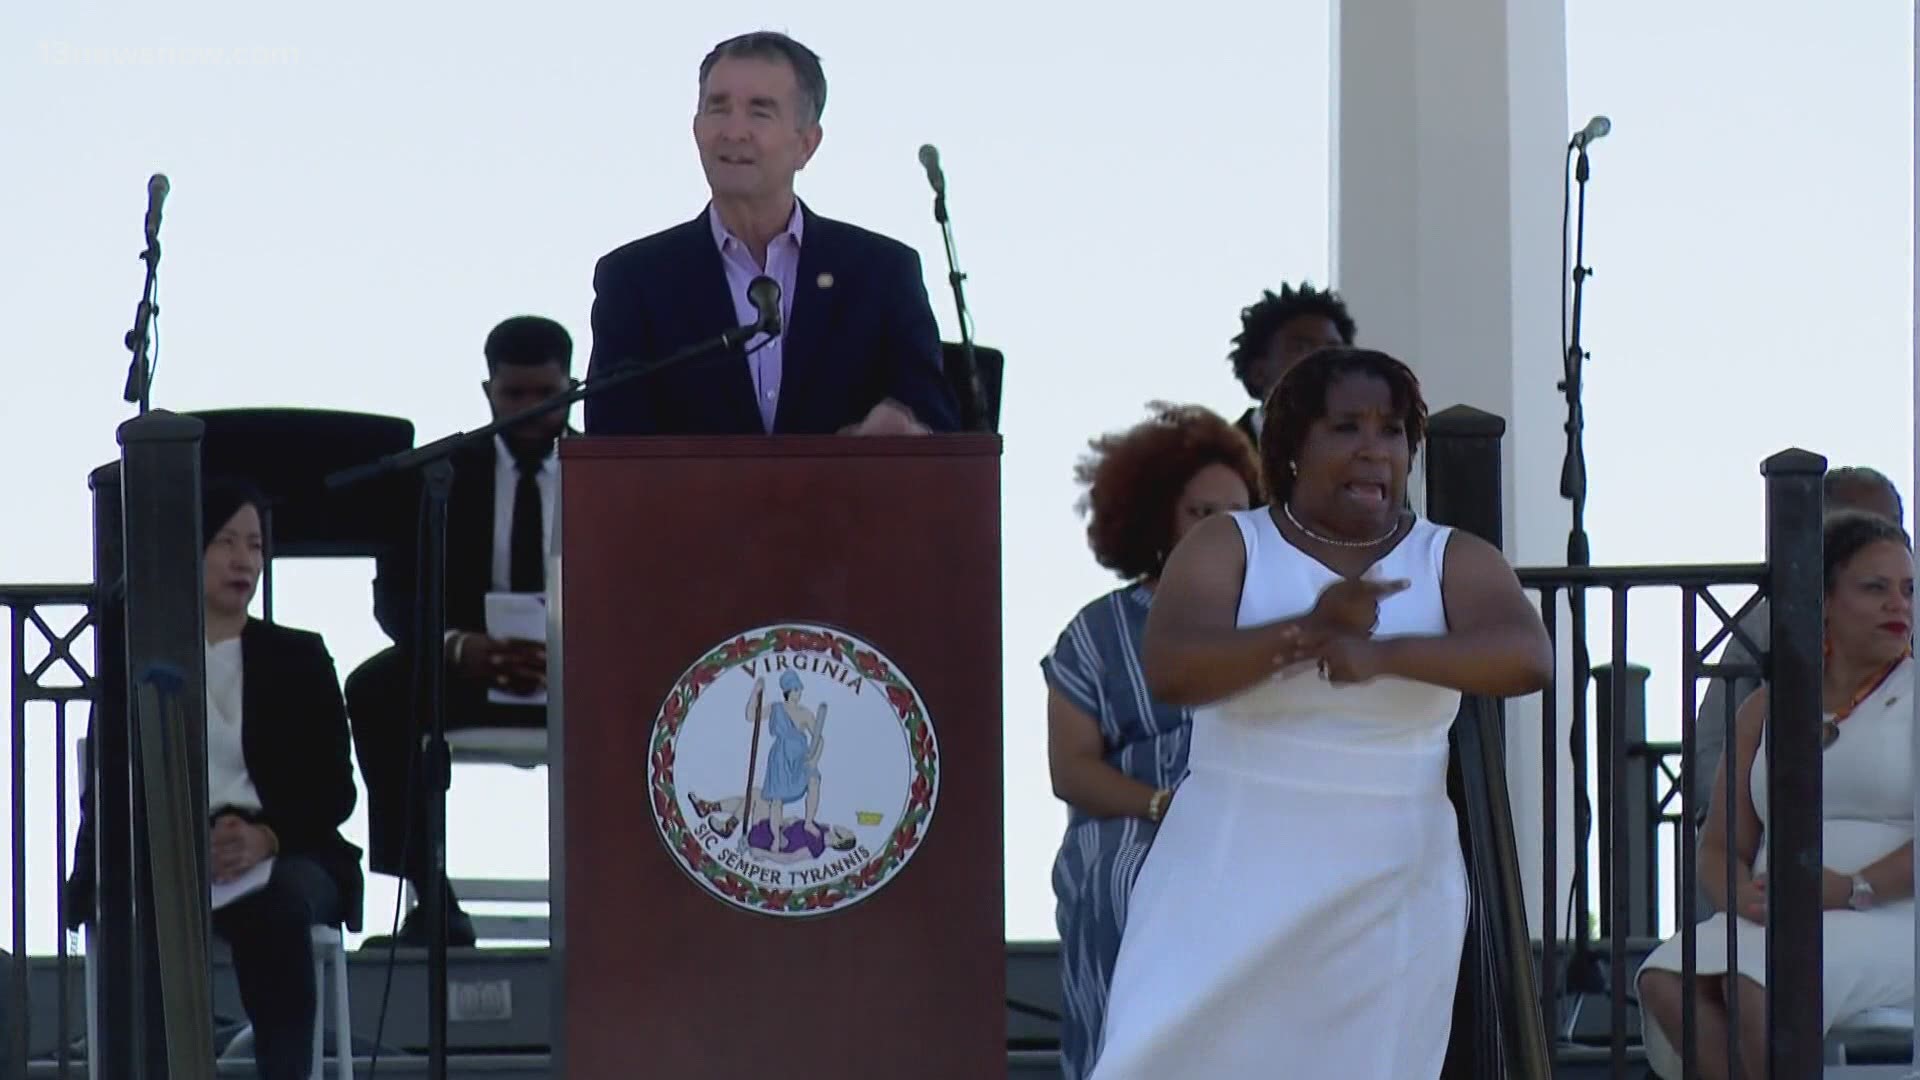 "We've struggled to live up to our own ideals of freedom and justice for all," Northam said. The first enslaved African Americans landed at Hampton in 1619.